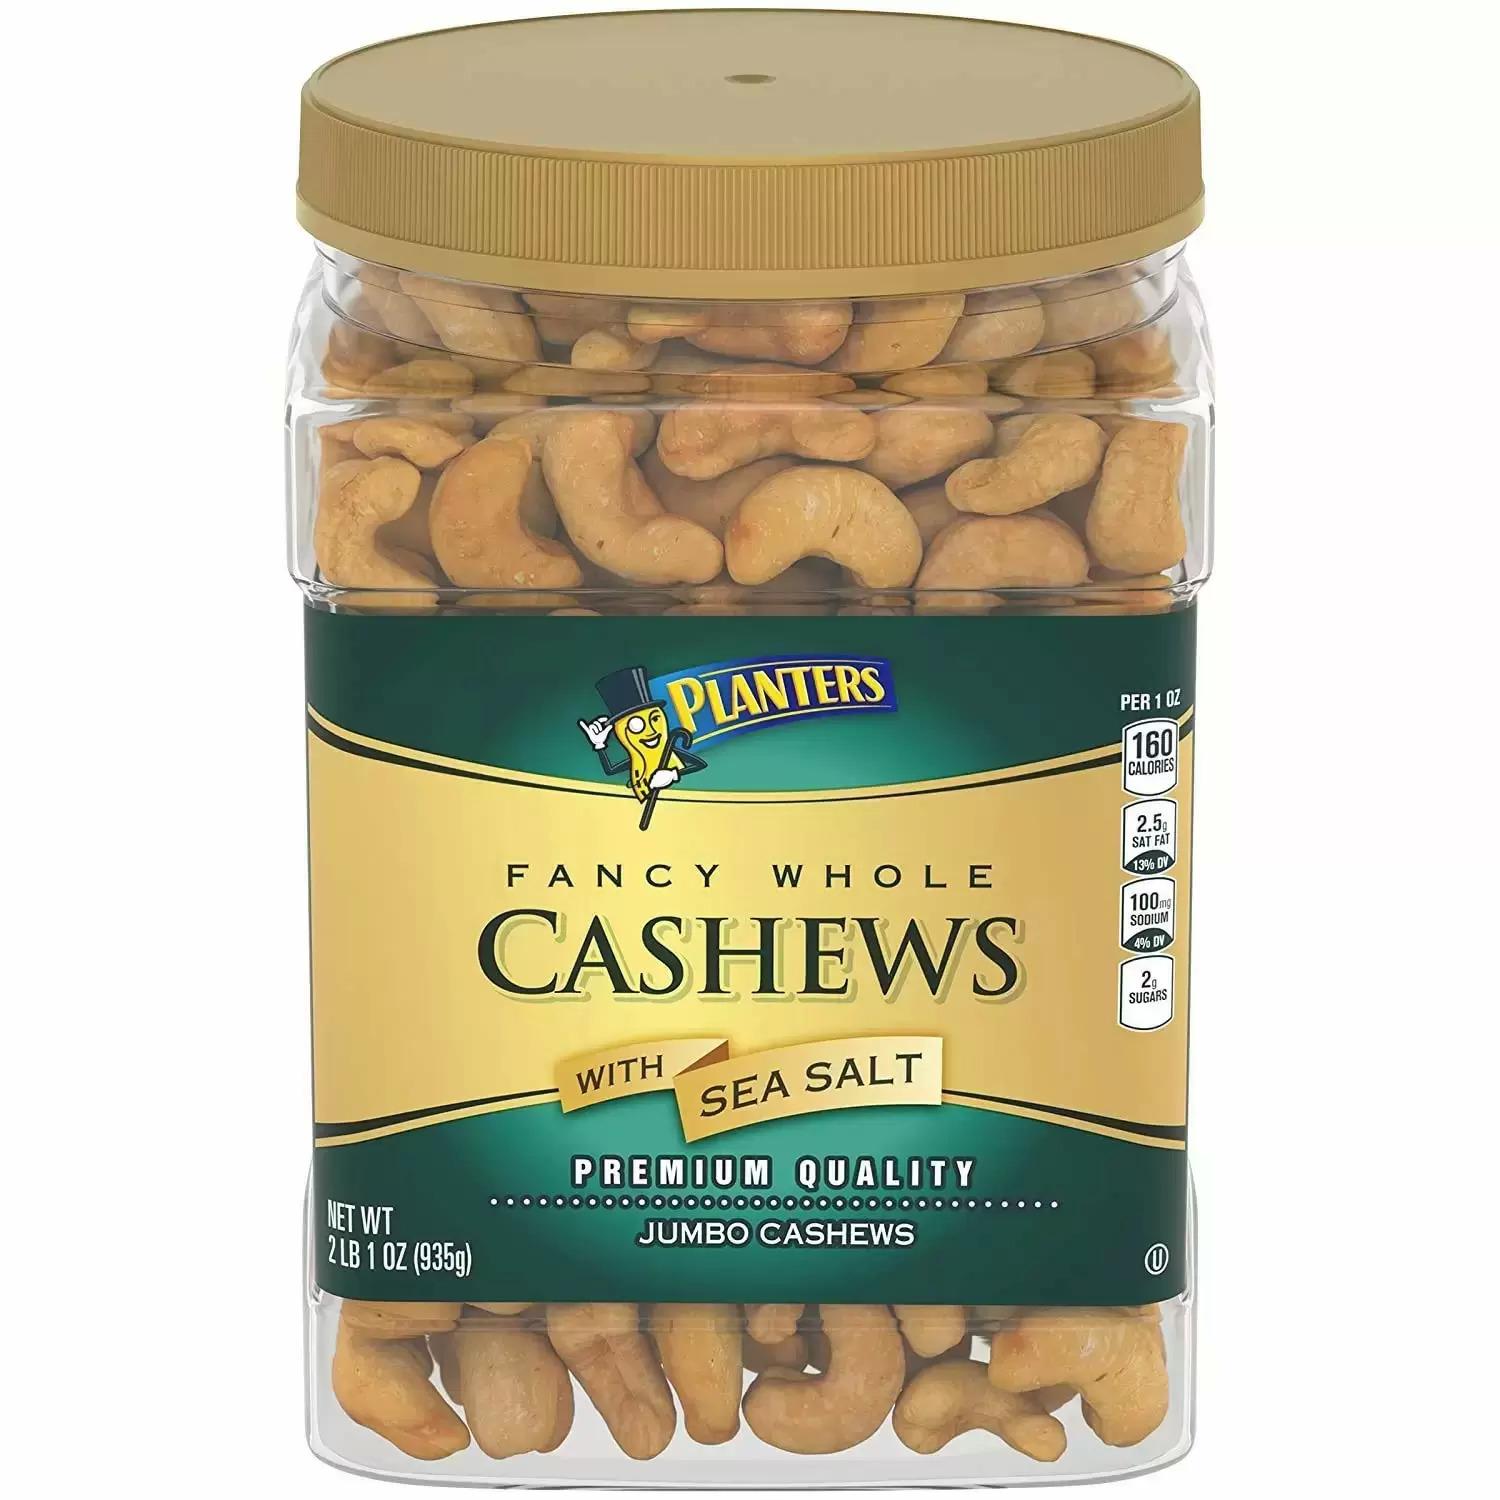 Planters Fancy Whole Cashews with Sea Salt 33oz for $12.36 Shipped